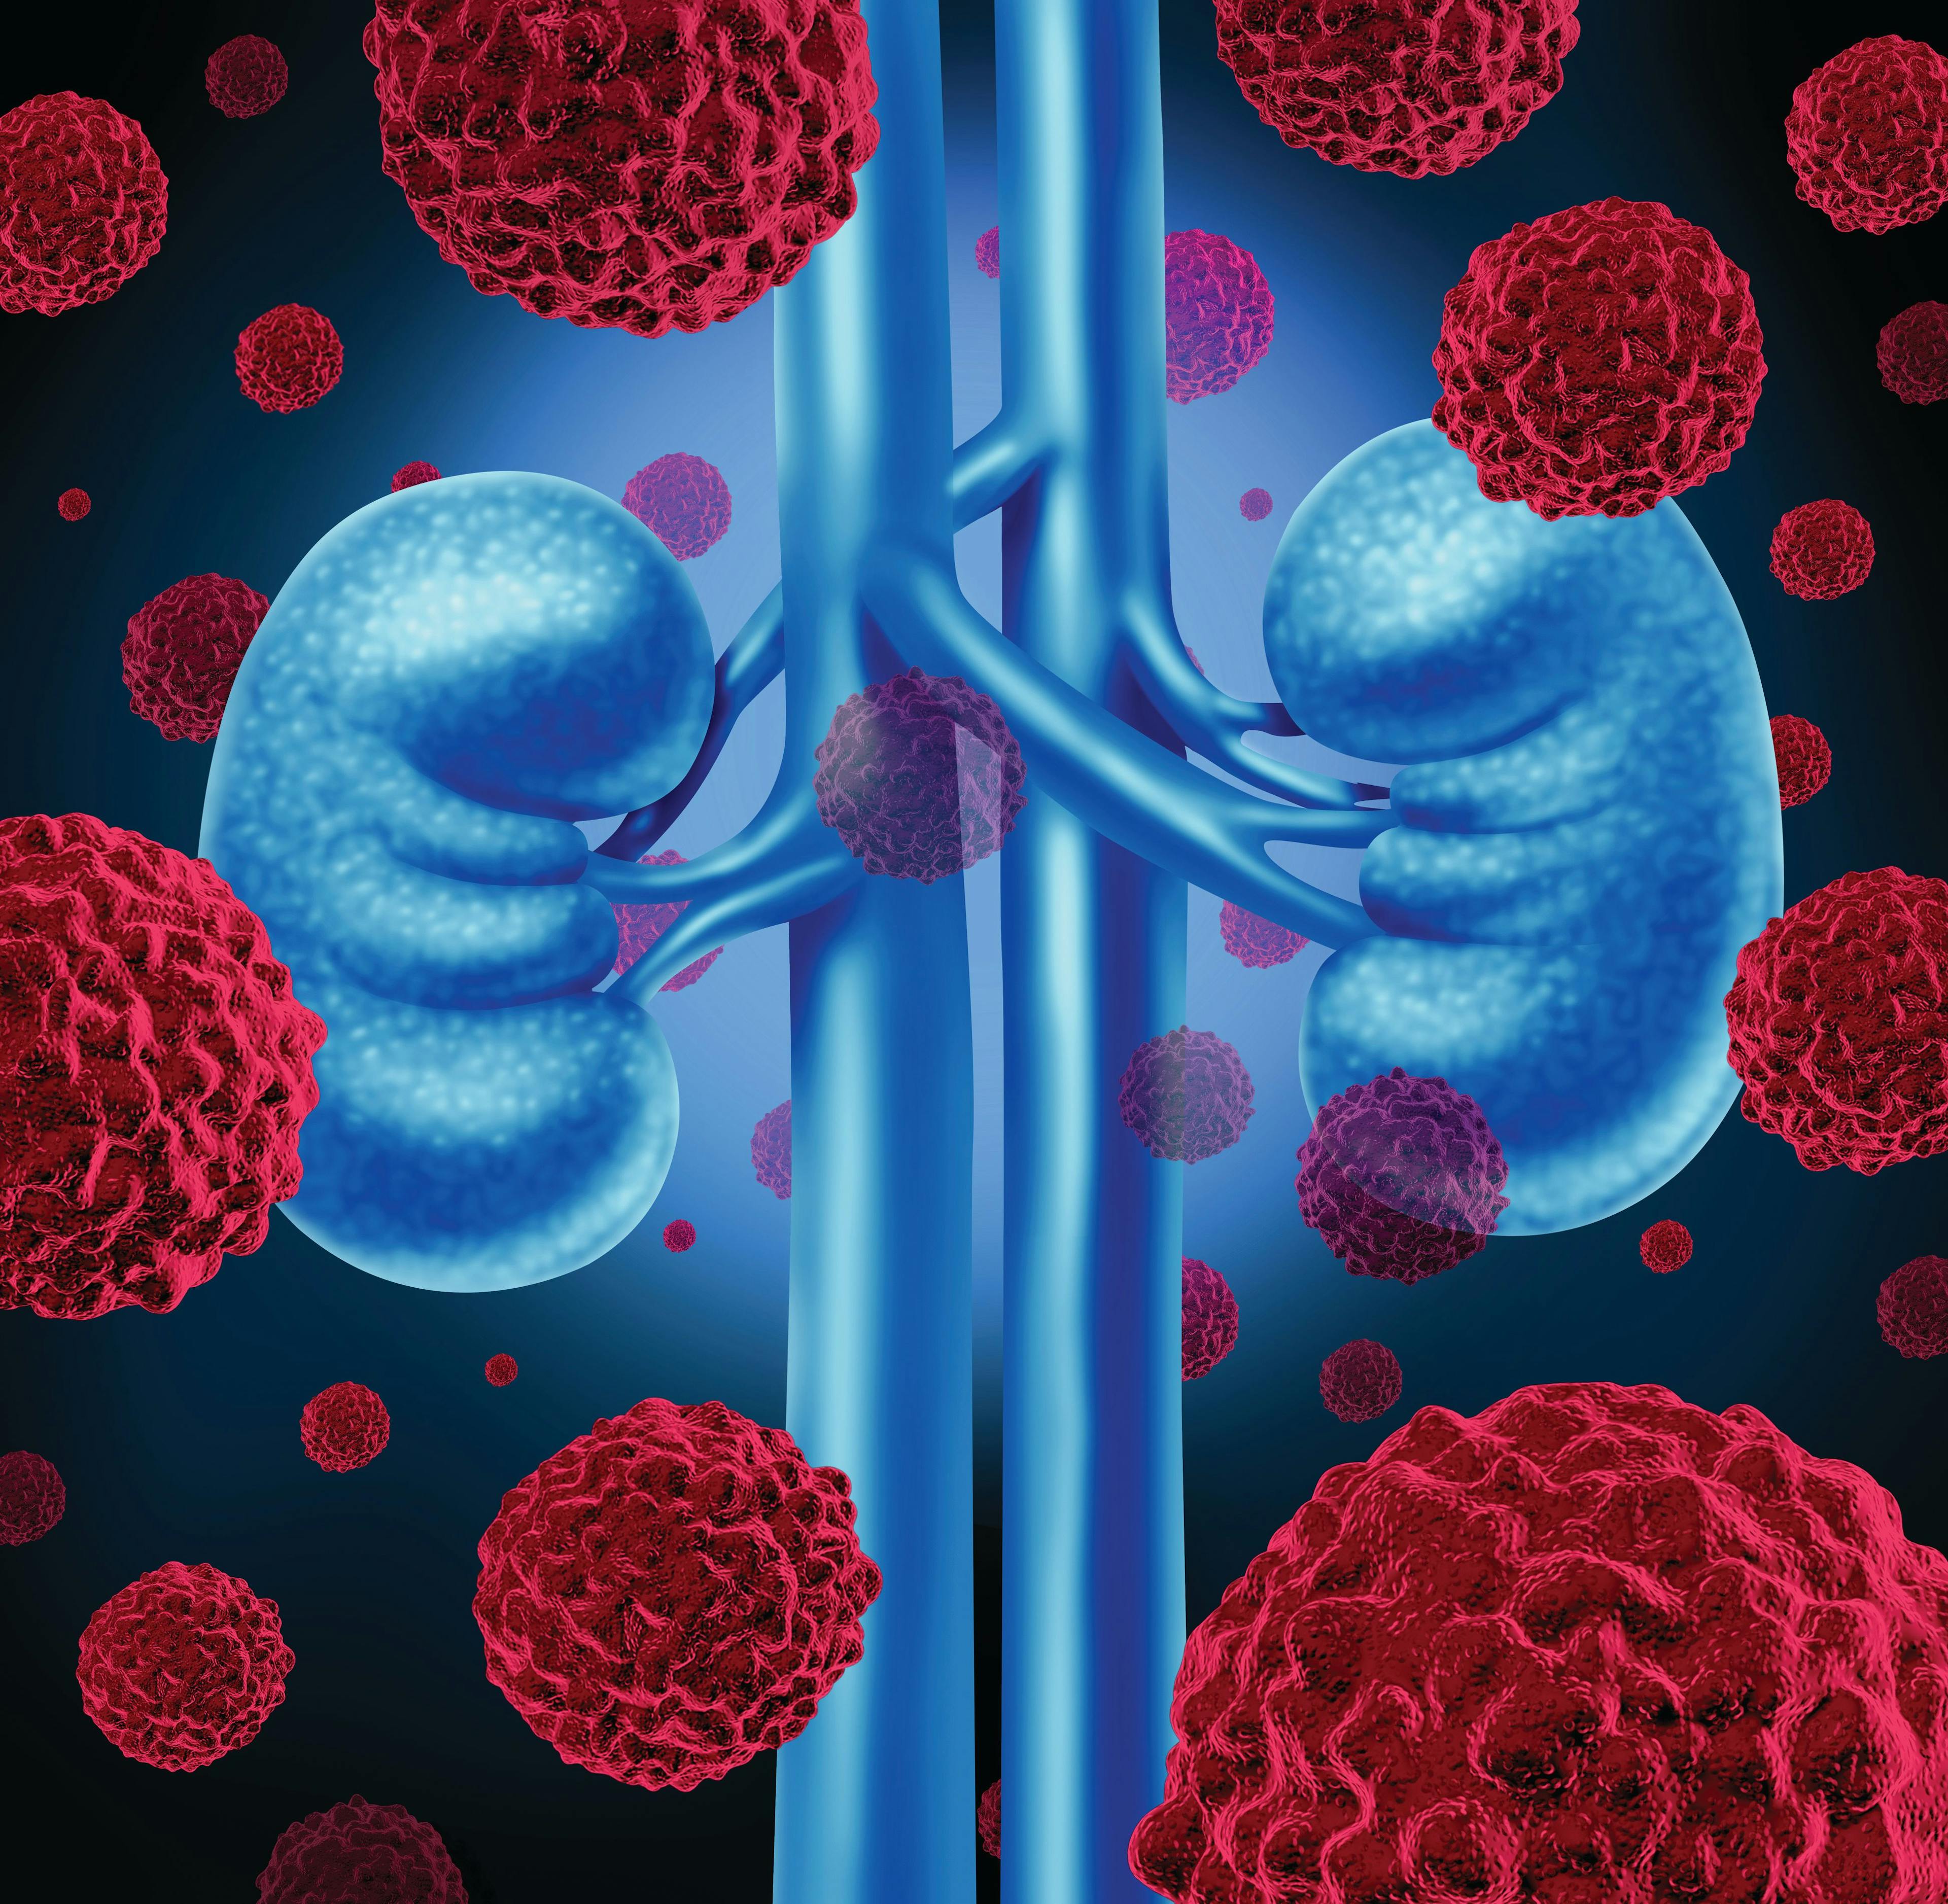 Fotivda Nearly Doubles Duration of Response Compared With Nexavar in Metastatic Kidney Cancer